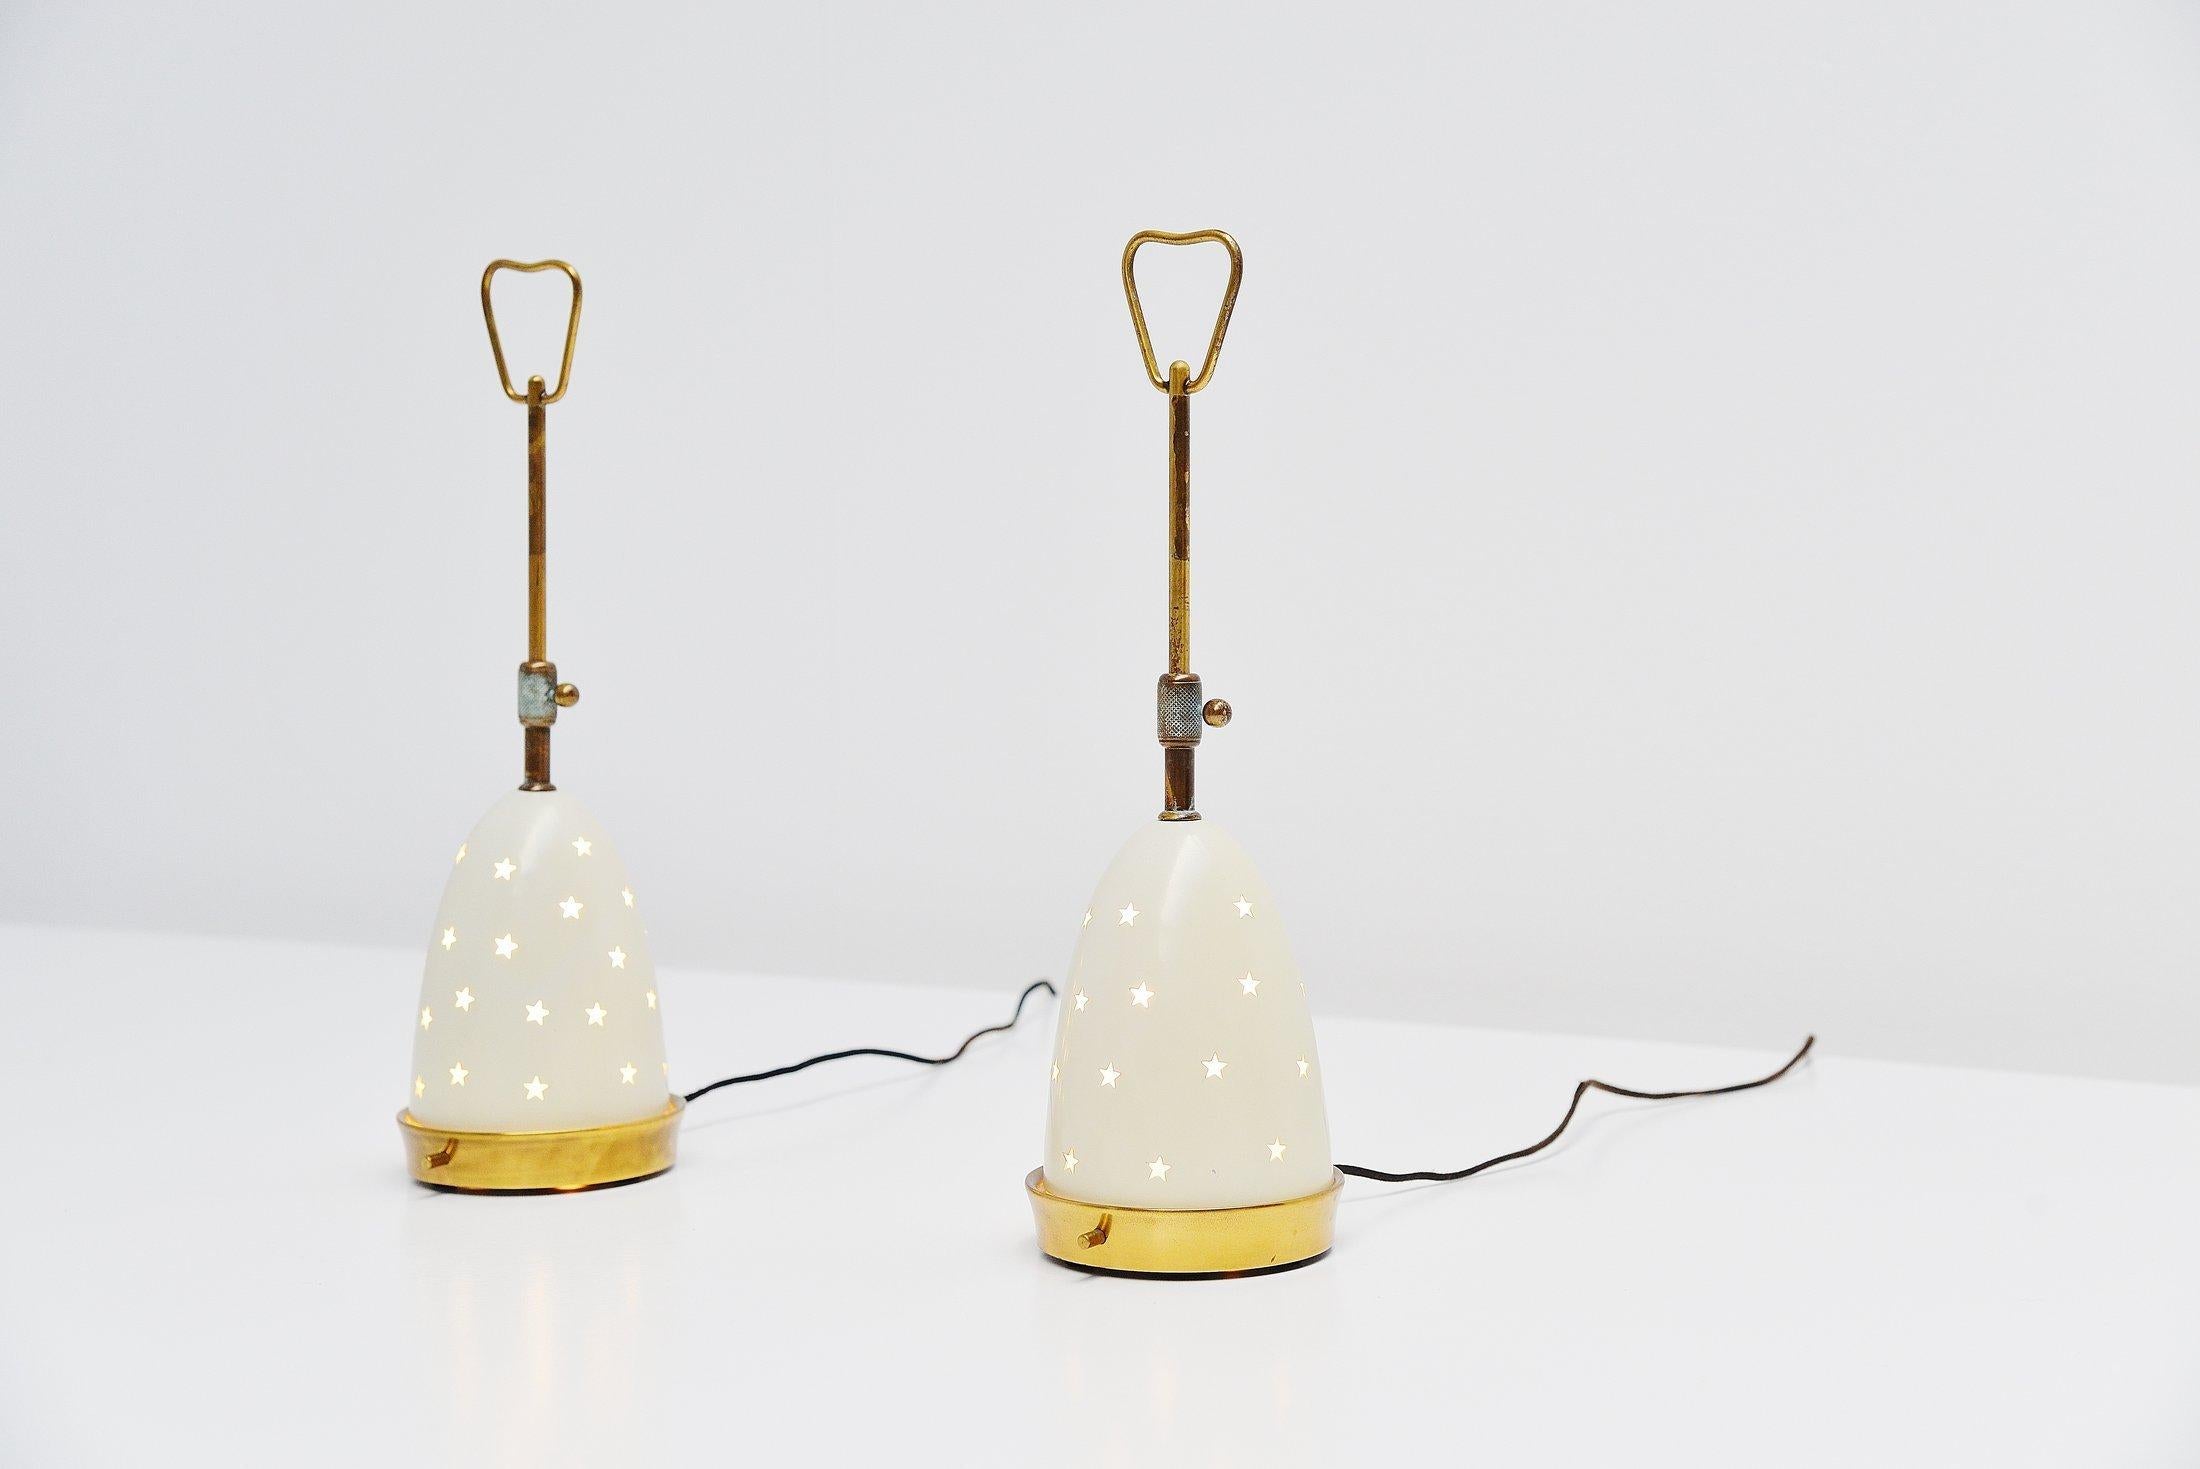 Fantastic pair of small table or bedside lamps model 12291 designed by Angelo Lelli and manufactured by Arredoluce, Italy, 1950. These lamps have a brass structure and a double shade in frosted glass and metal. The outer shade has a die cut star